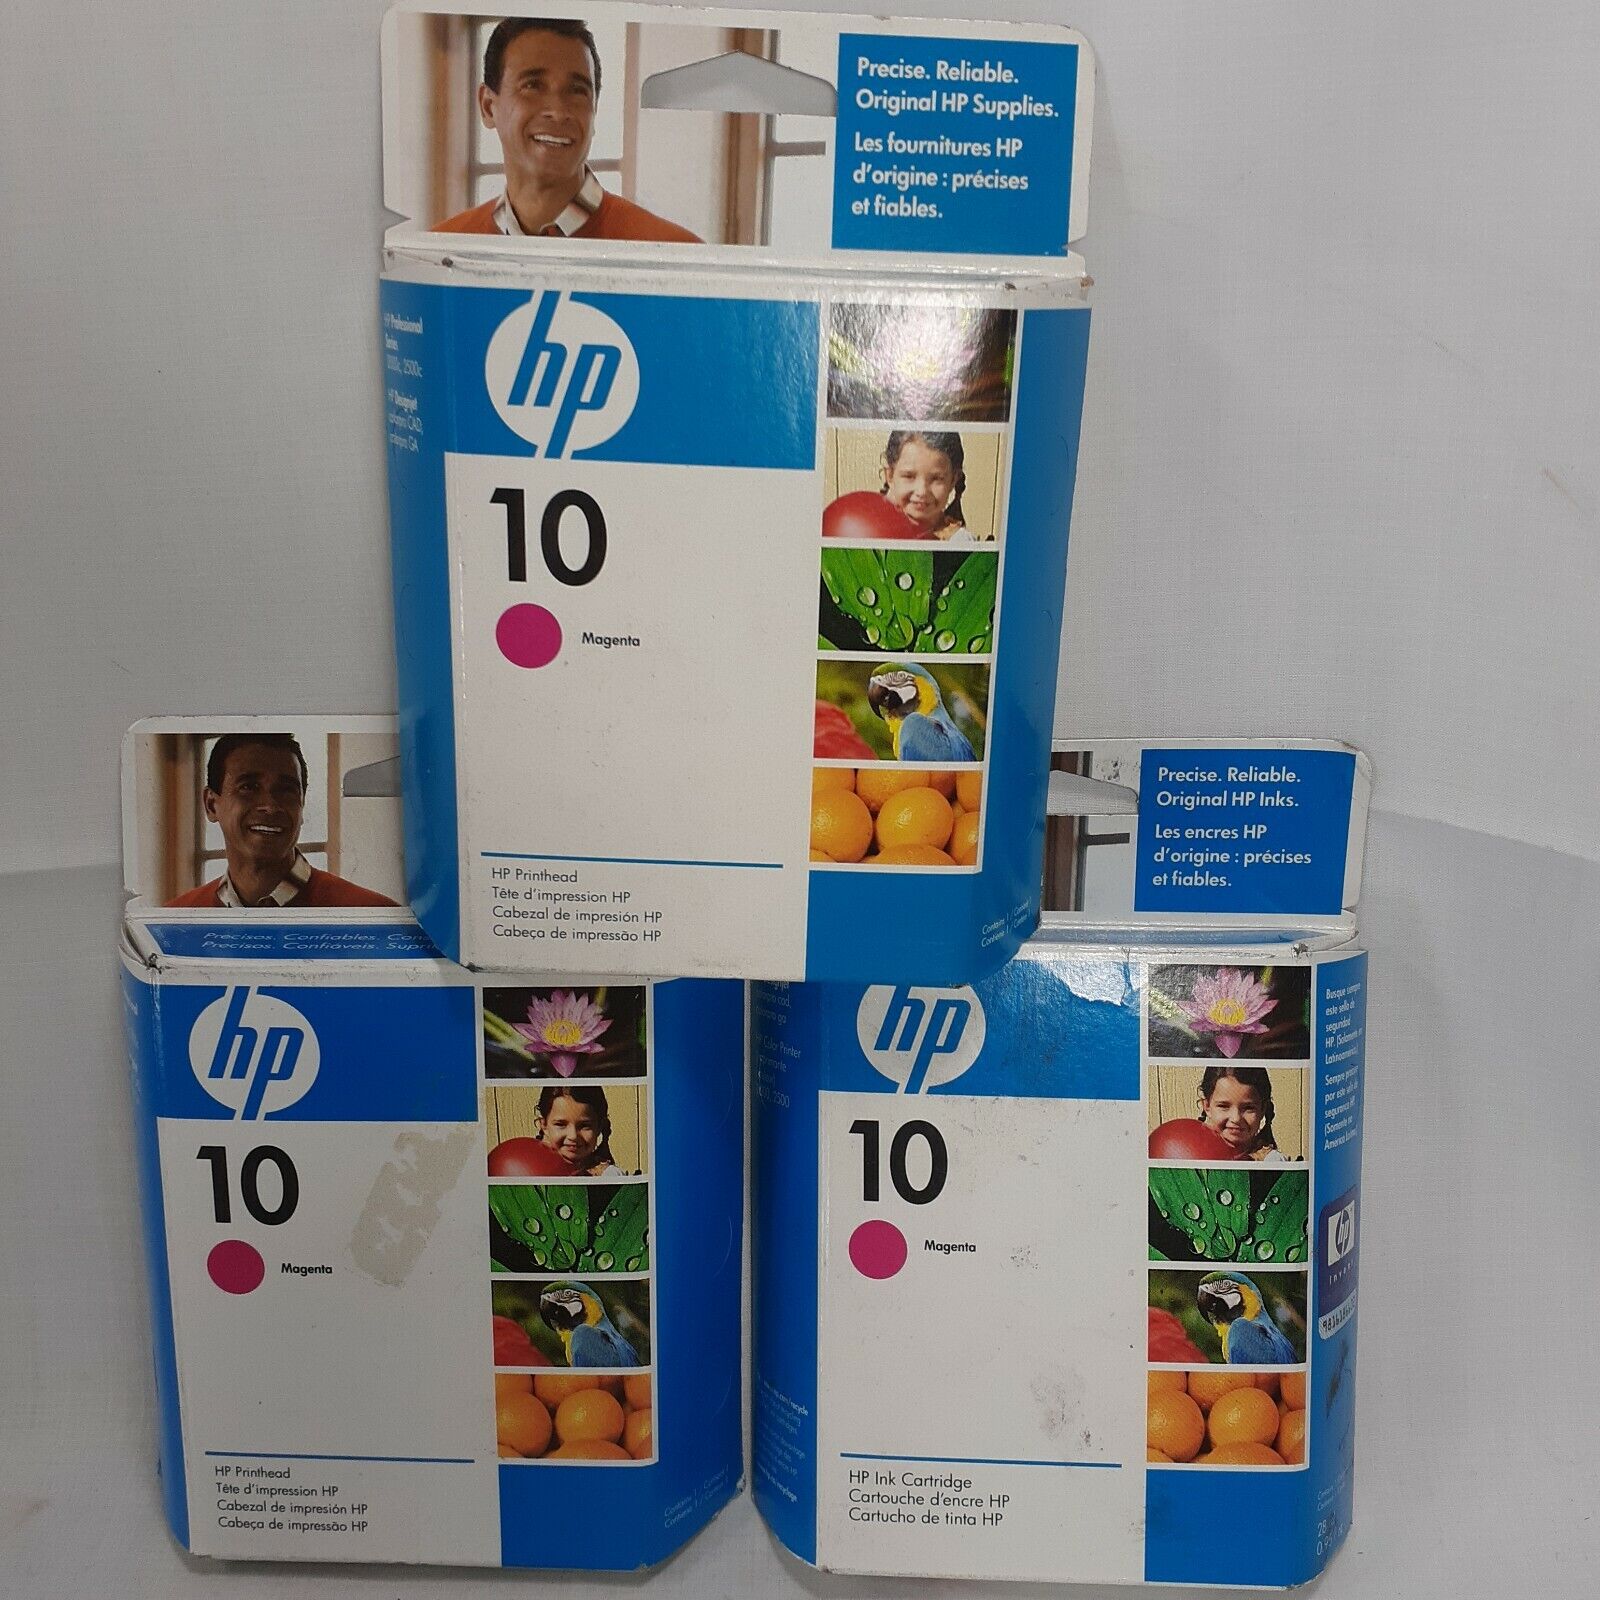 HP 10 Magenta Inkjet Print Cartridges C4802A Lot of 3 Sealed  New Old Stock Ink